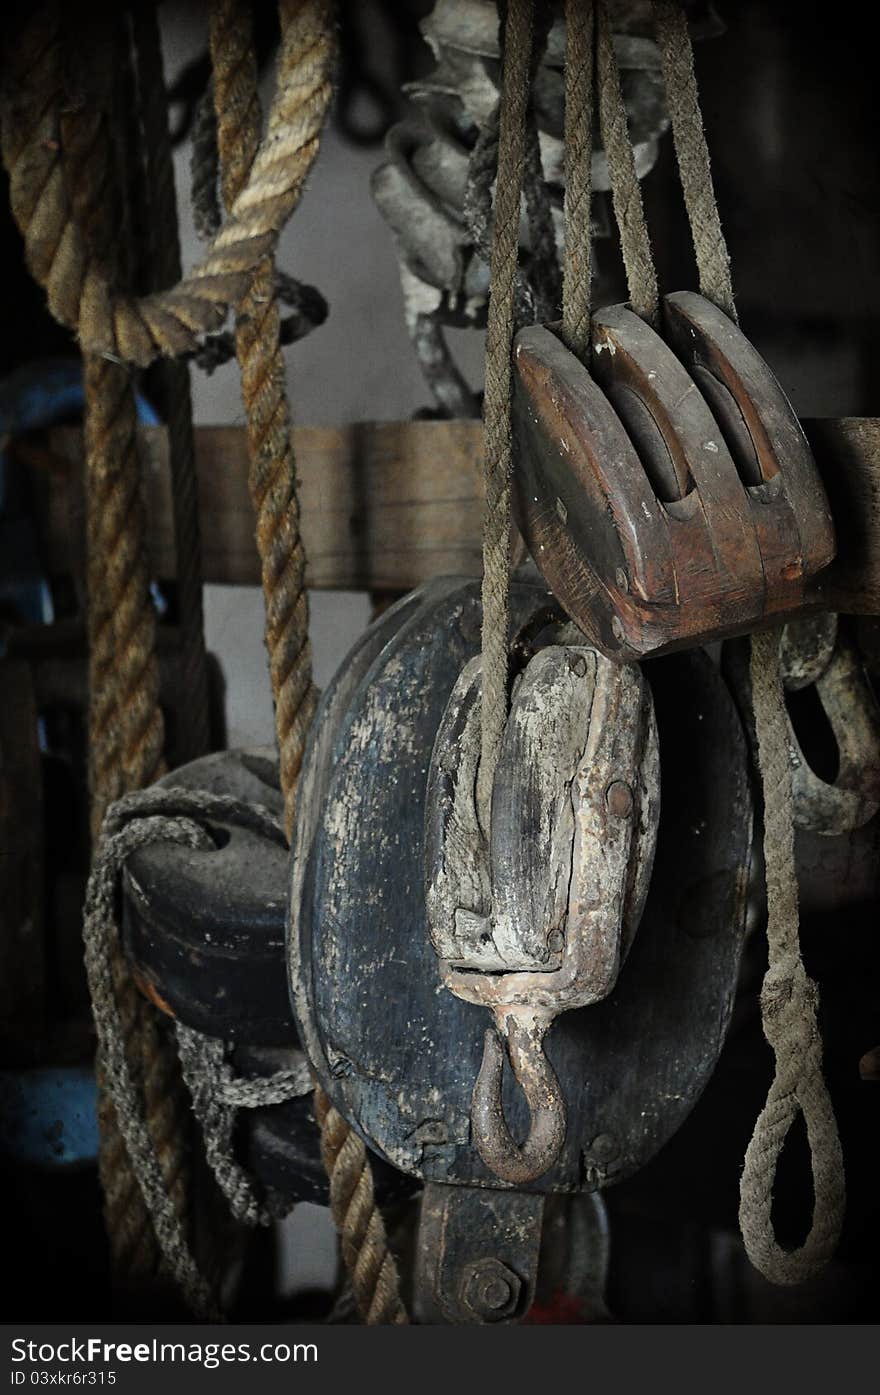 Ropes and old ship rigging parts in storage. Ropes and old ship rigging parts in storage.